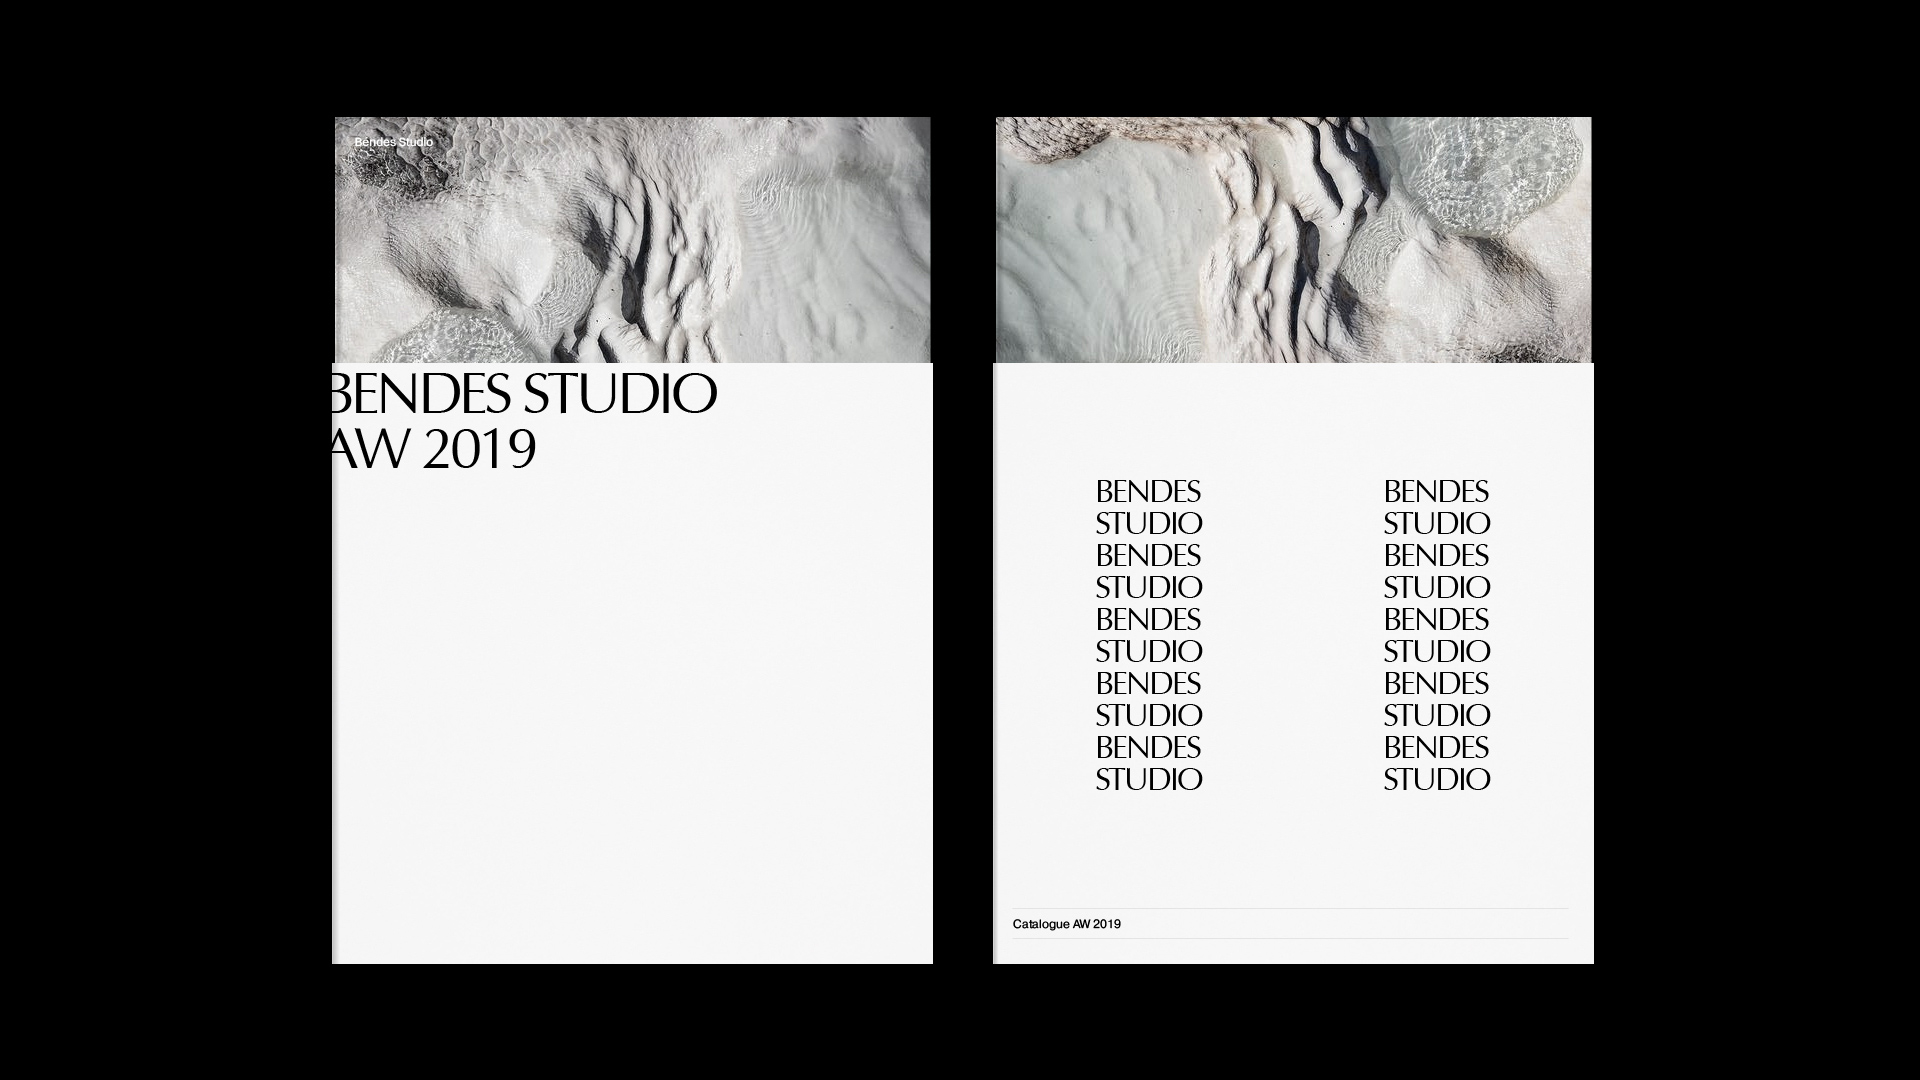 New Logo and Identity for Bendes by ARENAS@lab